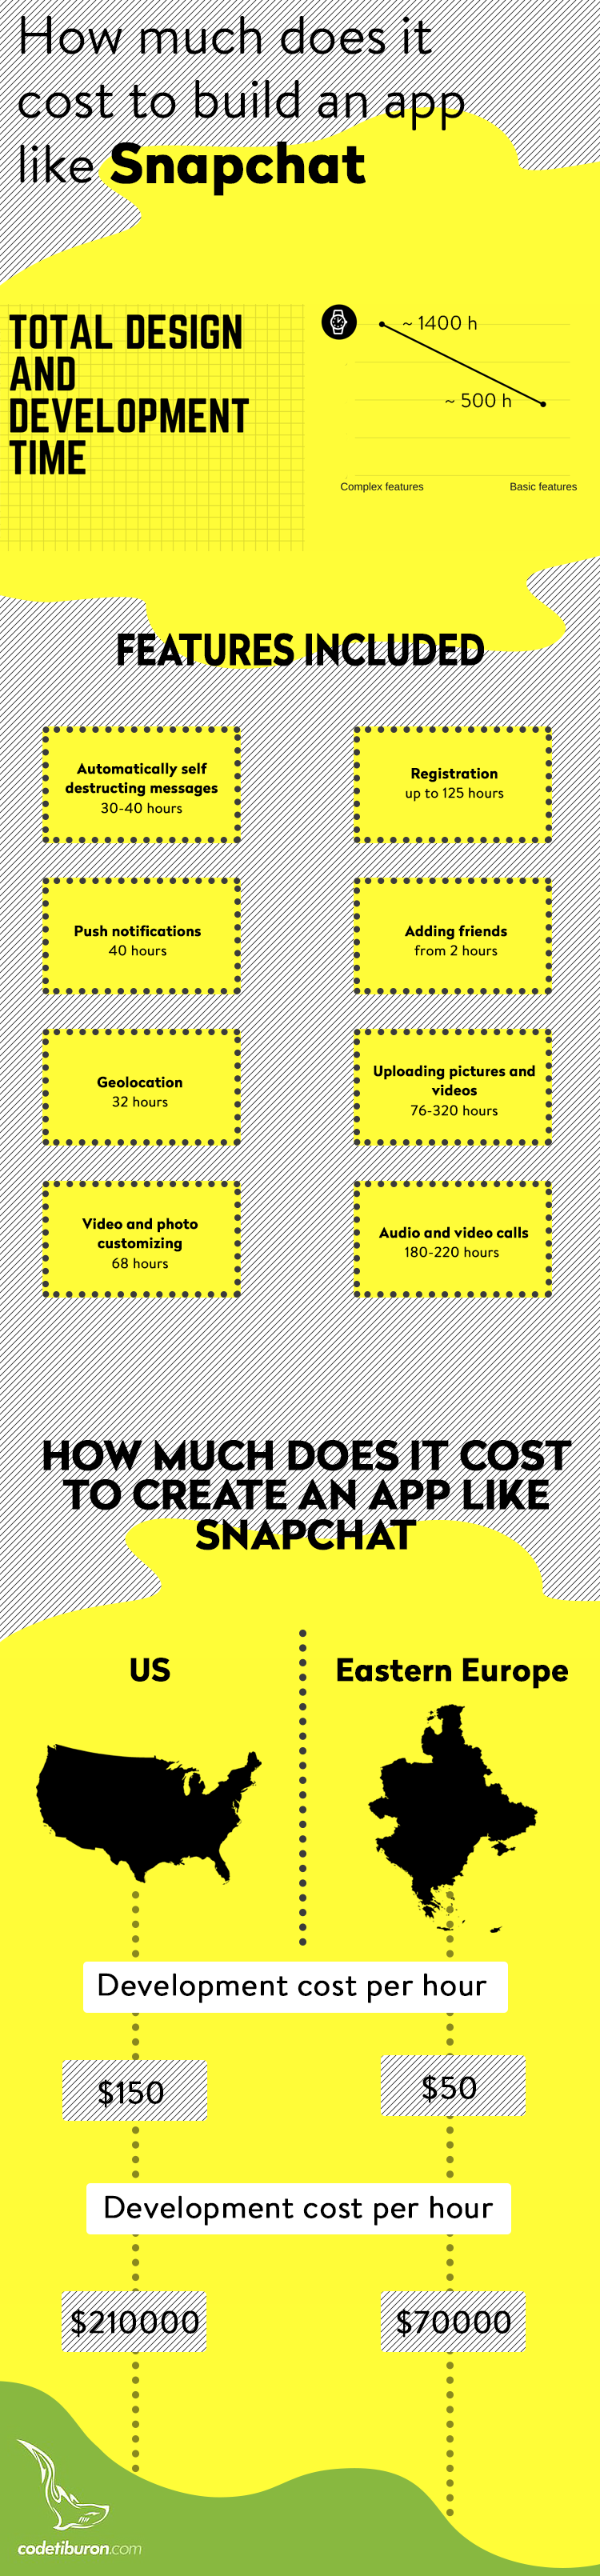 How much does it cost to make SnapChat similar app